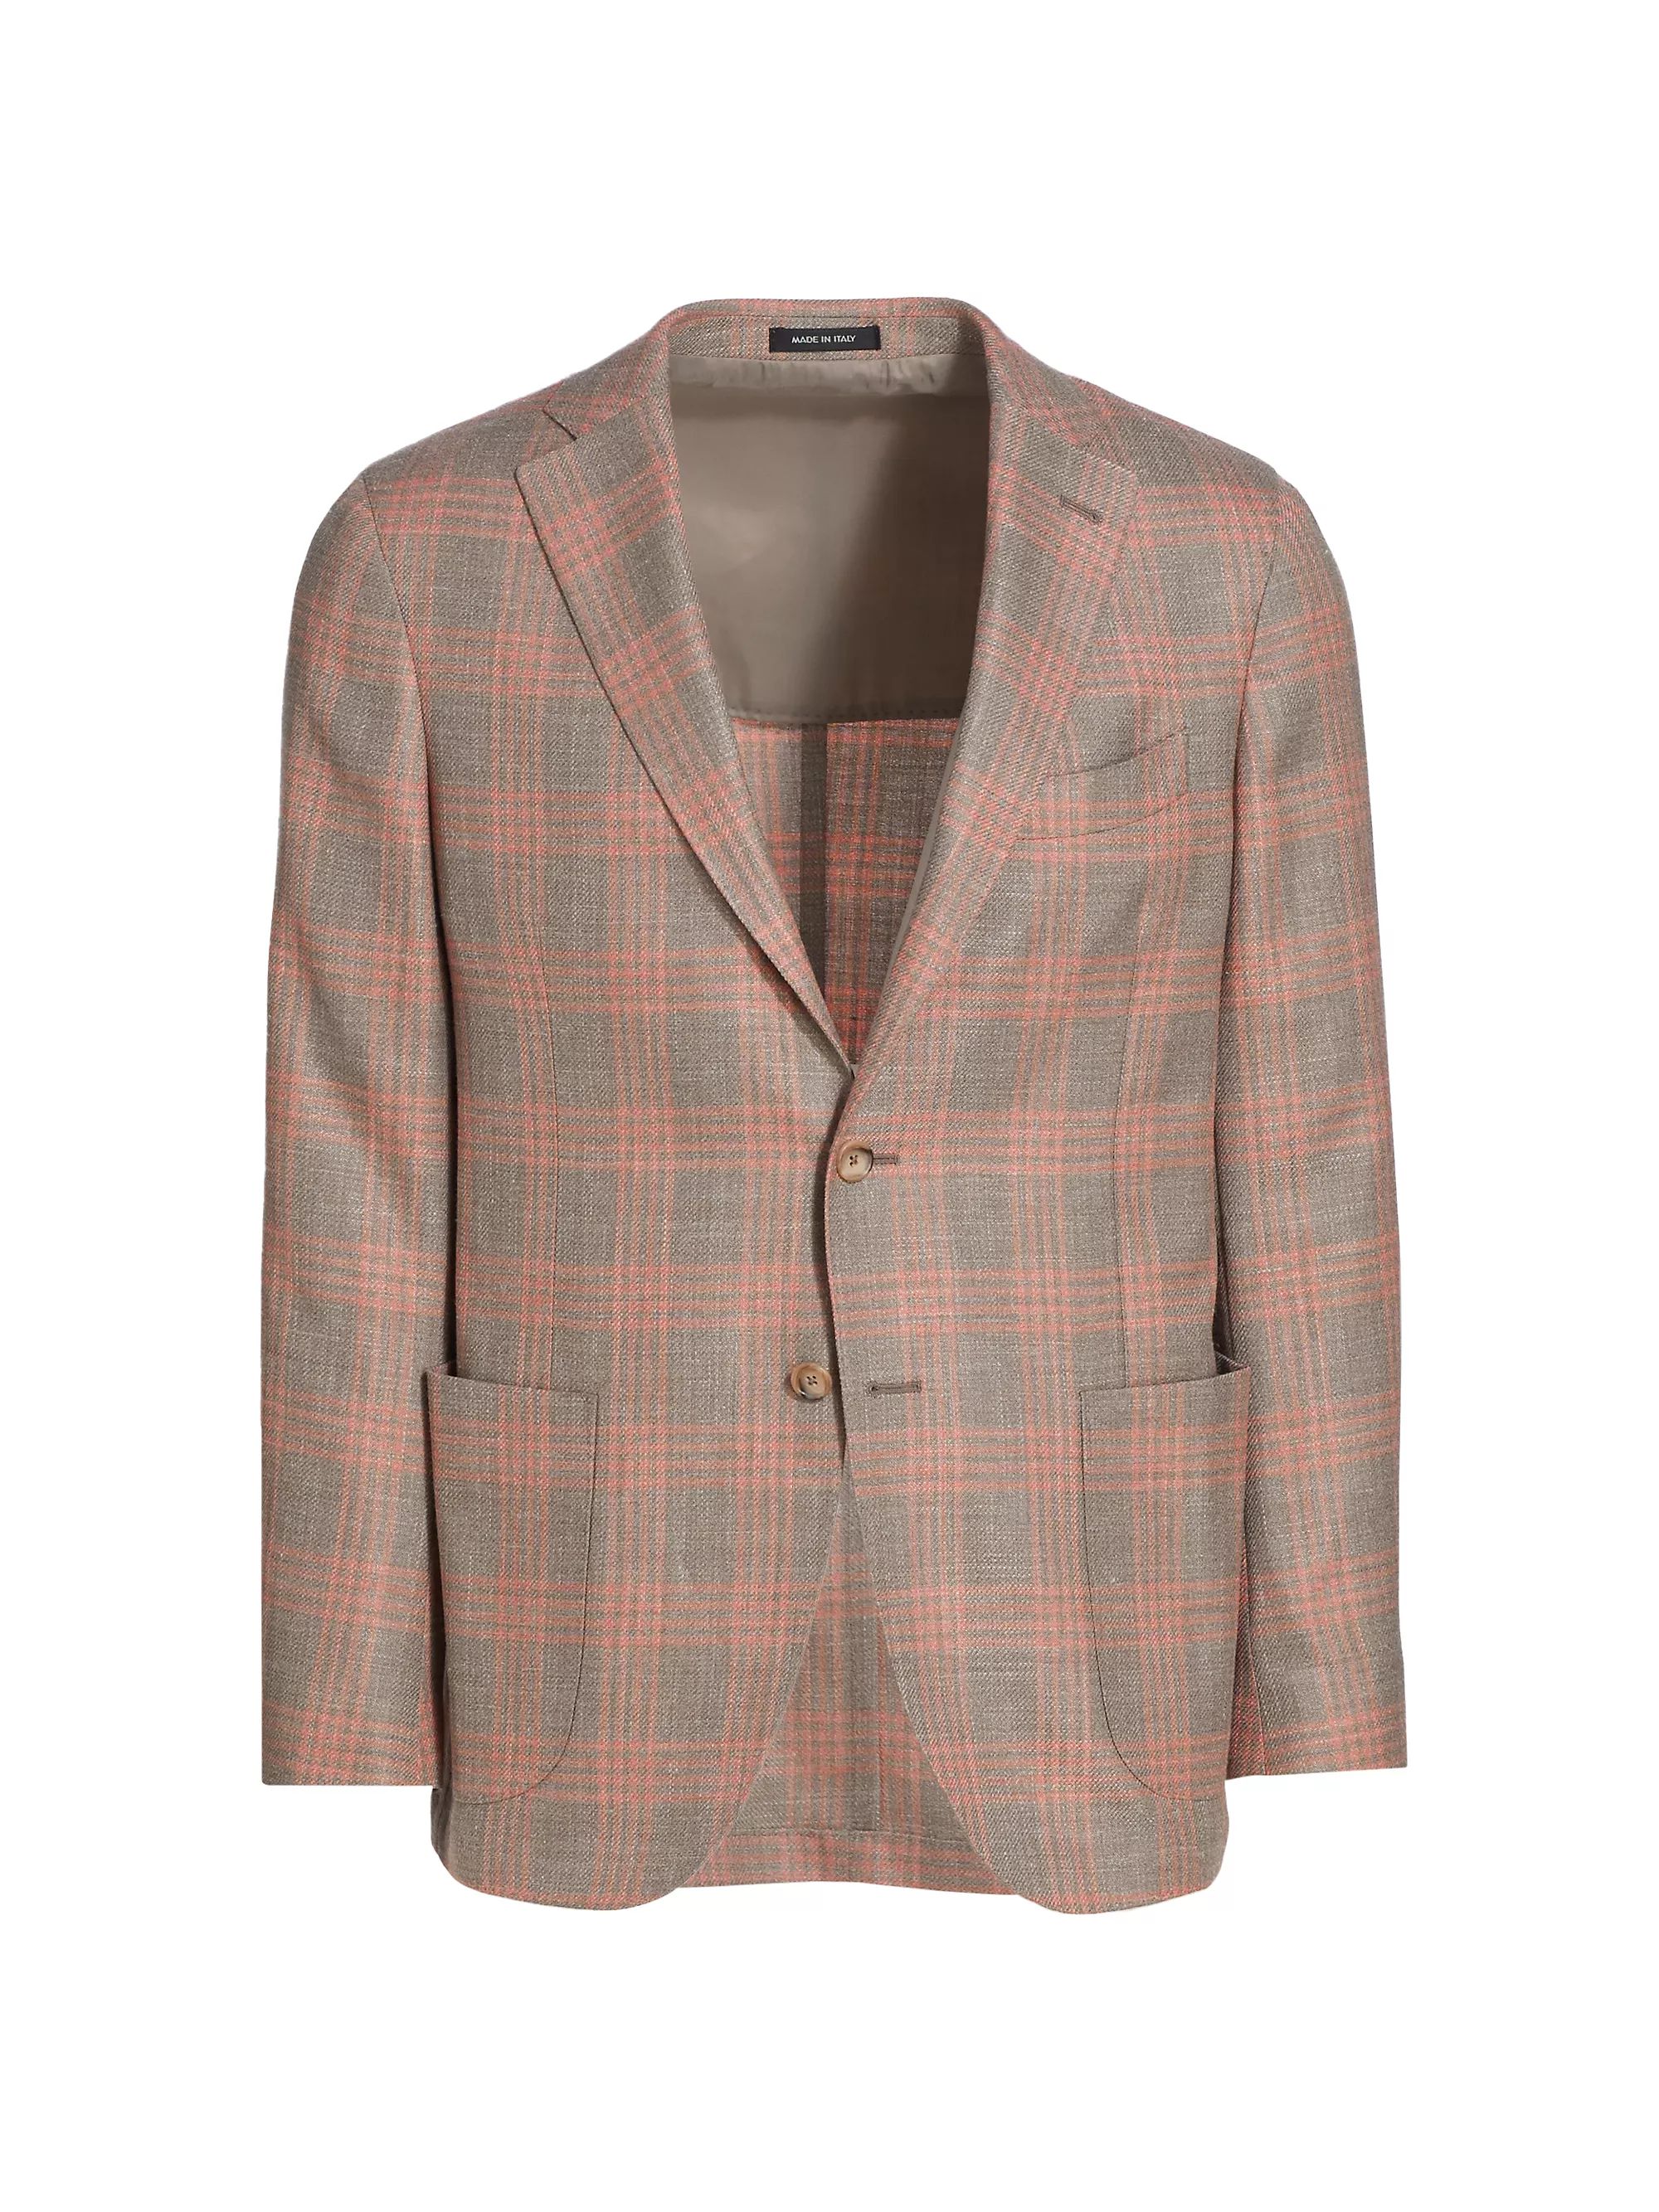 COLLECTION Soft Grid Sportcoat | Saks Fifth Avenue